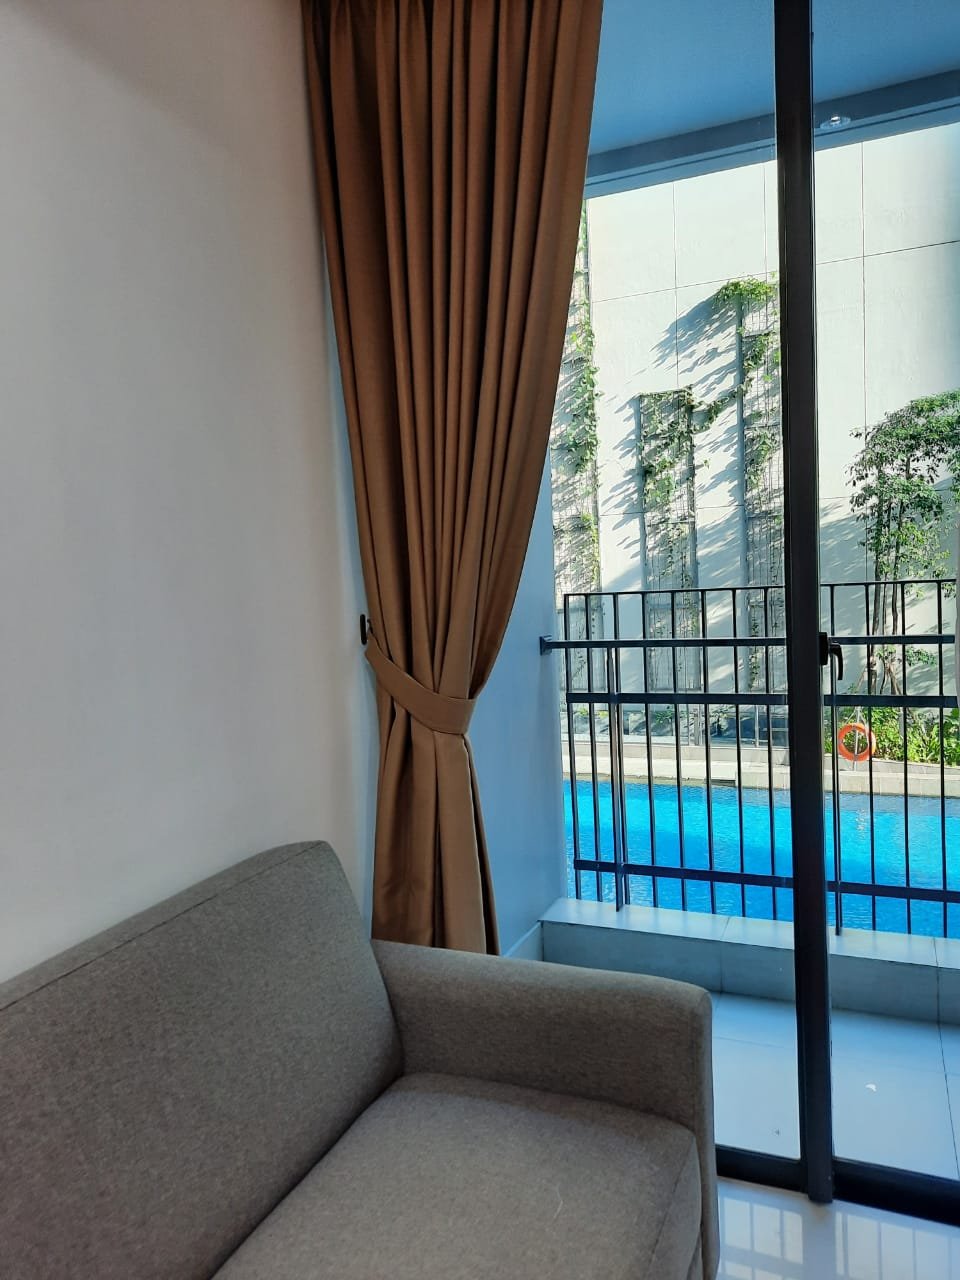 Unit Low Zone View Facing to the Swimming Pool, Like a Landed House, 2bedroom, 1bath with bath-up, Full Furnished Ready to Move-in, Casa Grande Residence Phase II Connected with Kota Kasablanka Shopping Mall